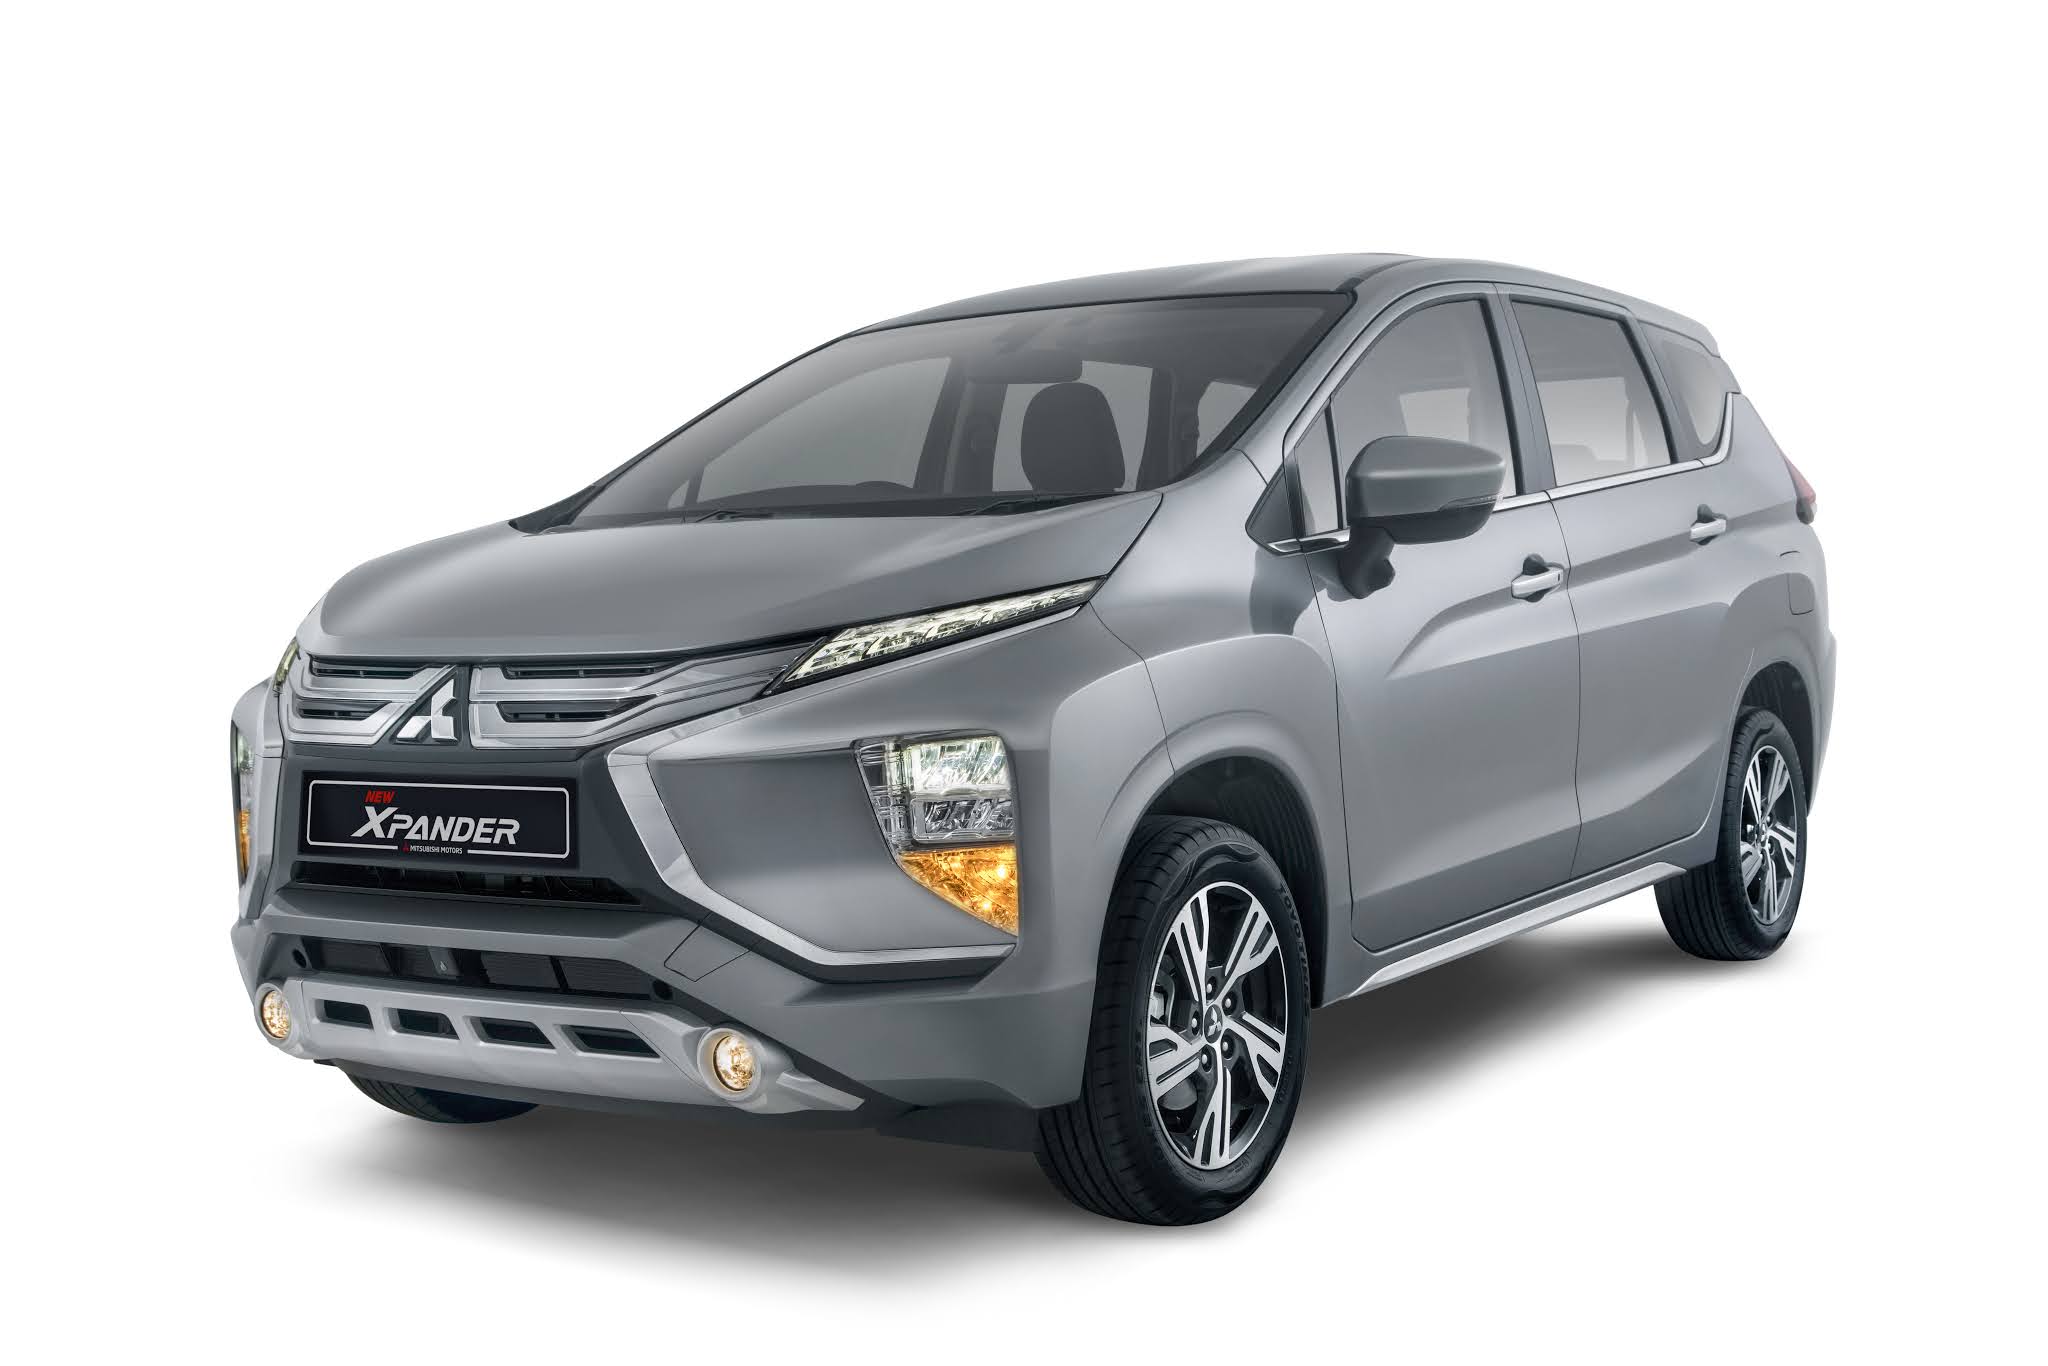 Motoring-Malaysia: The New Mitsubishi XPANDER is Now Open for Booking ...